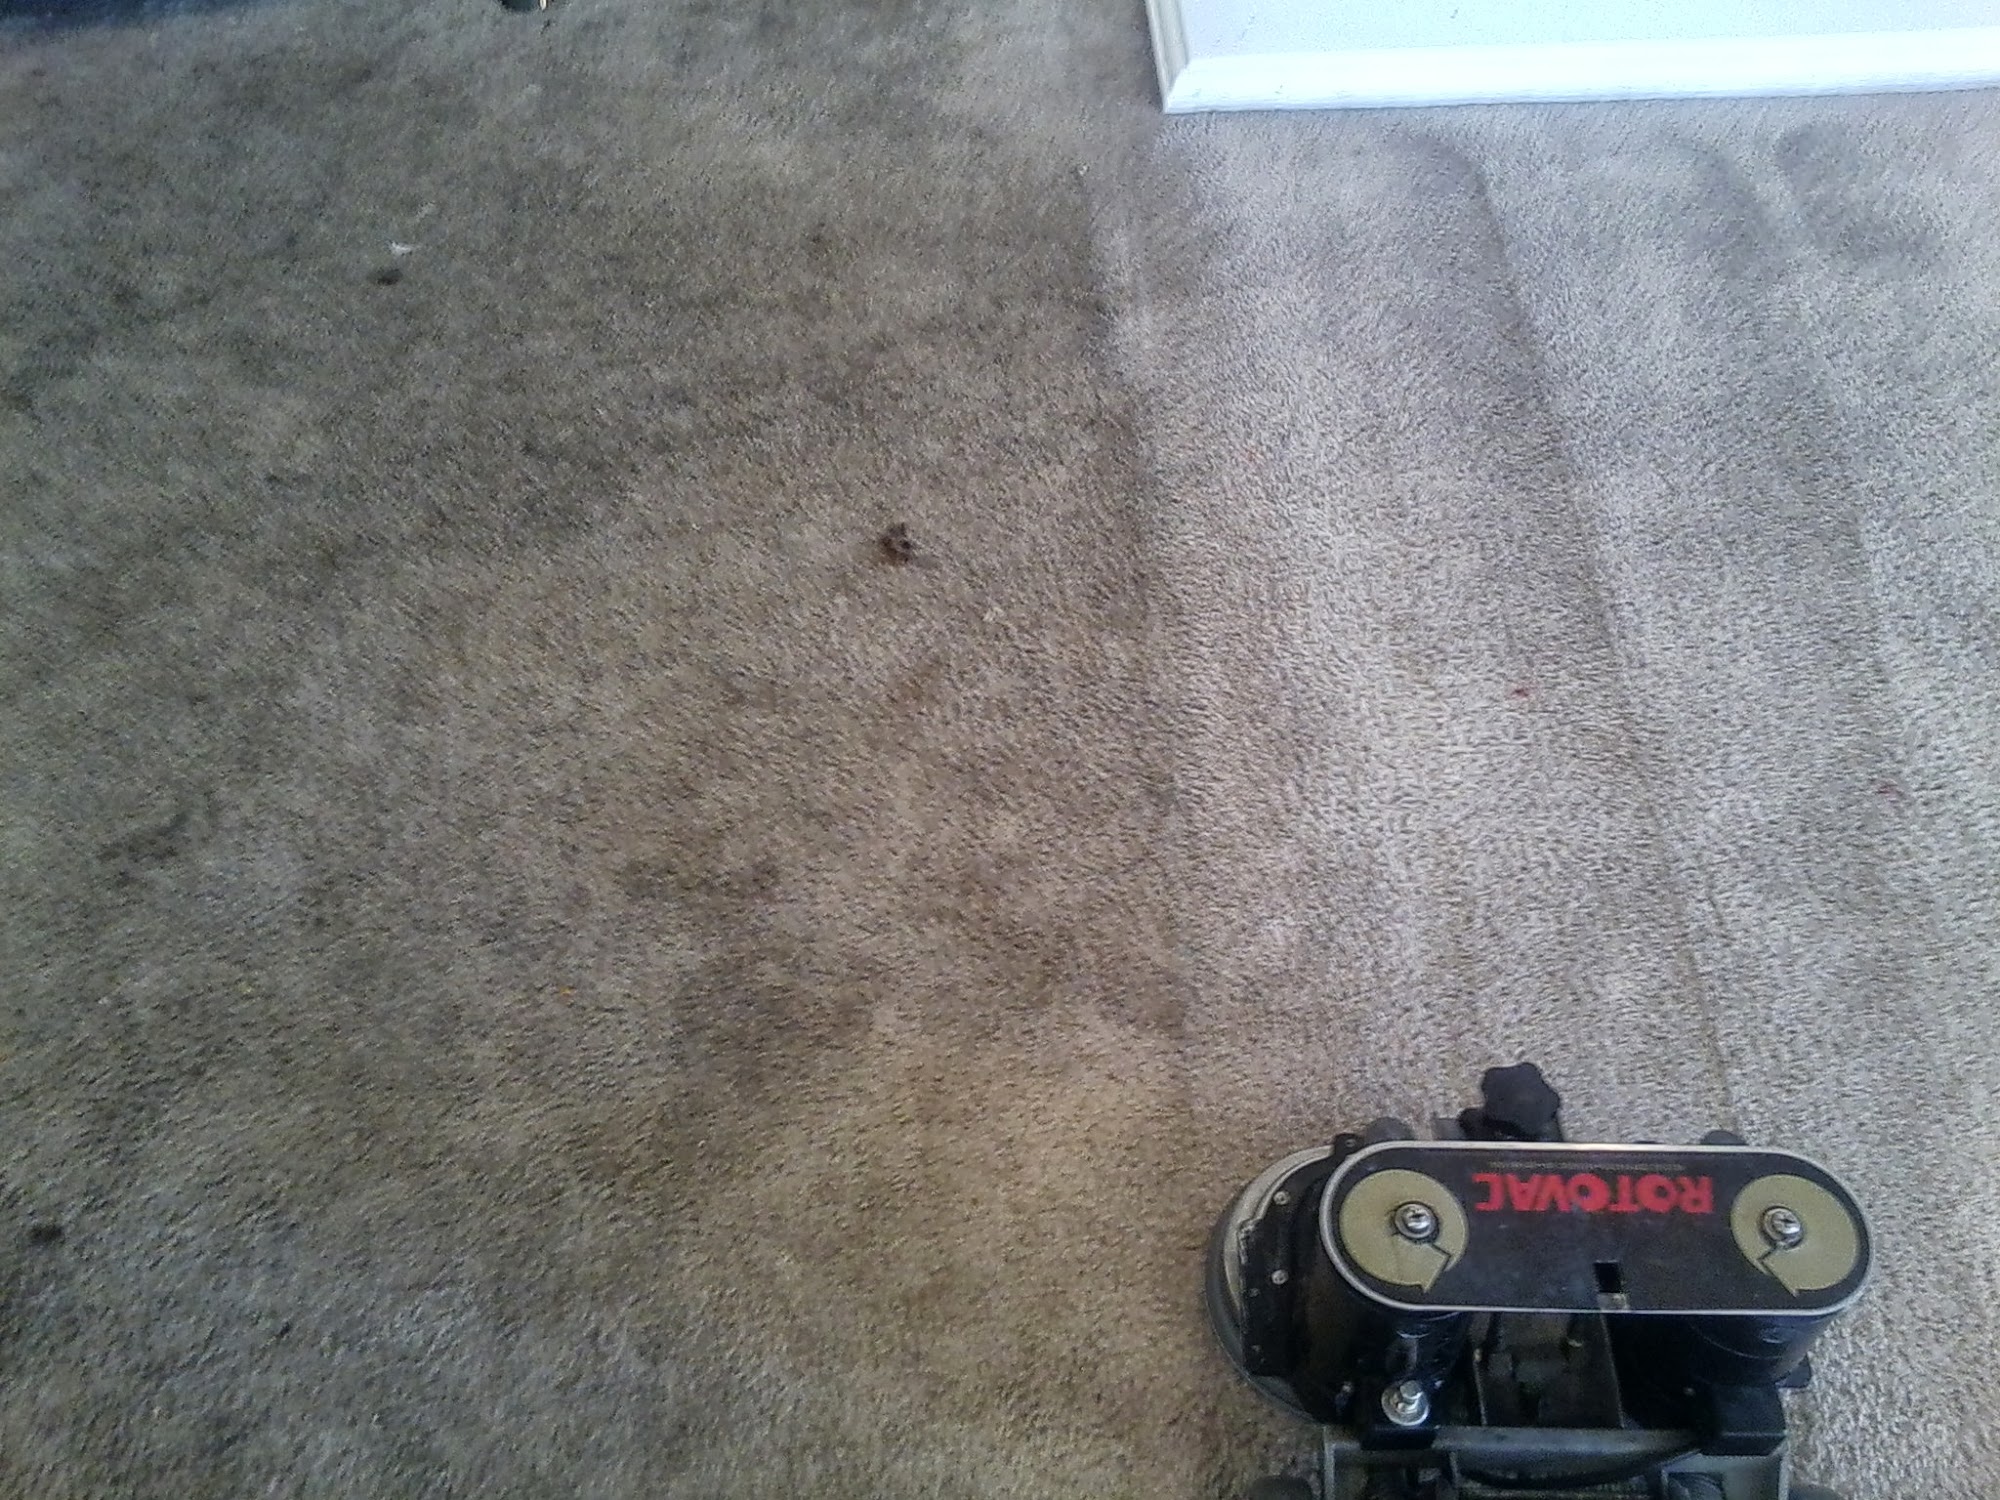 Doctor Steam Carpet & Upholstery Cleaning 6430 Opal St, Alta Loma California 91701